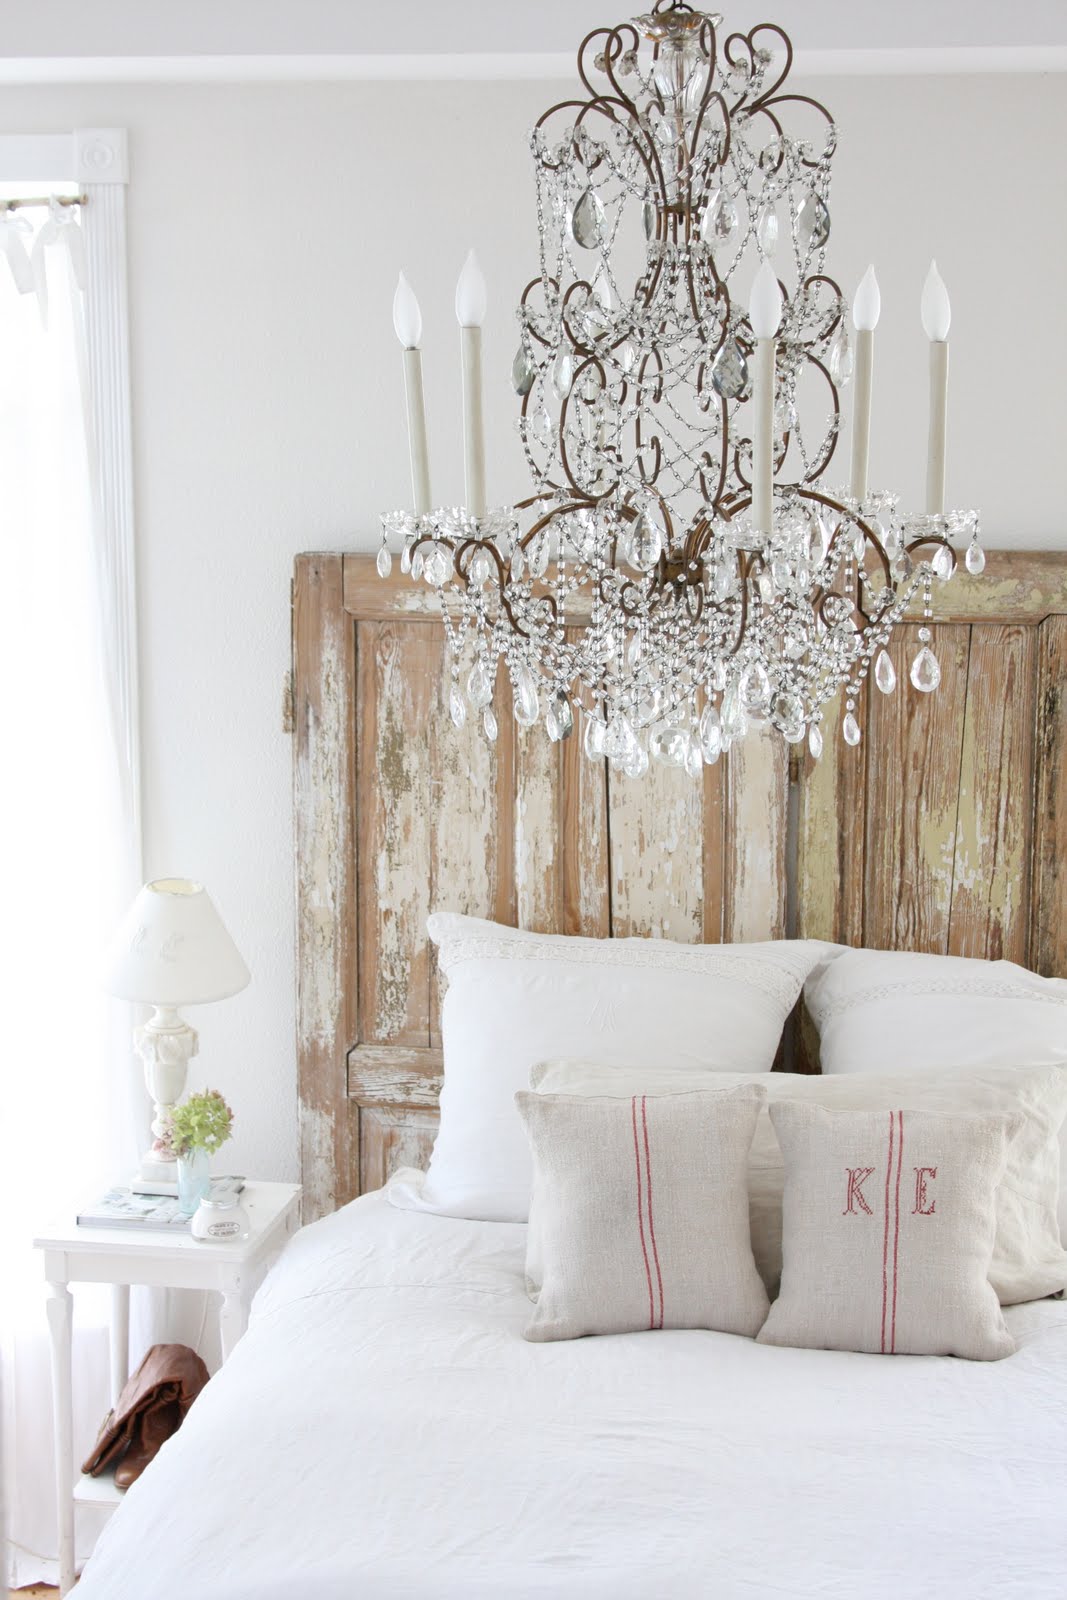 Chandelier over the bed